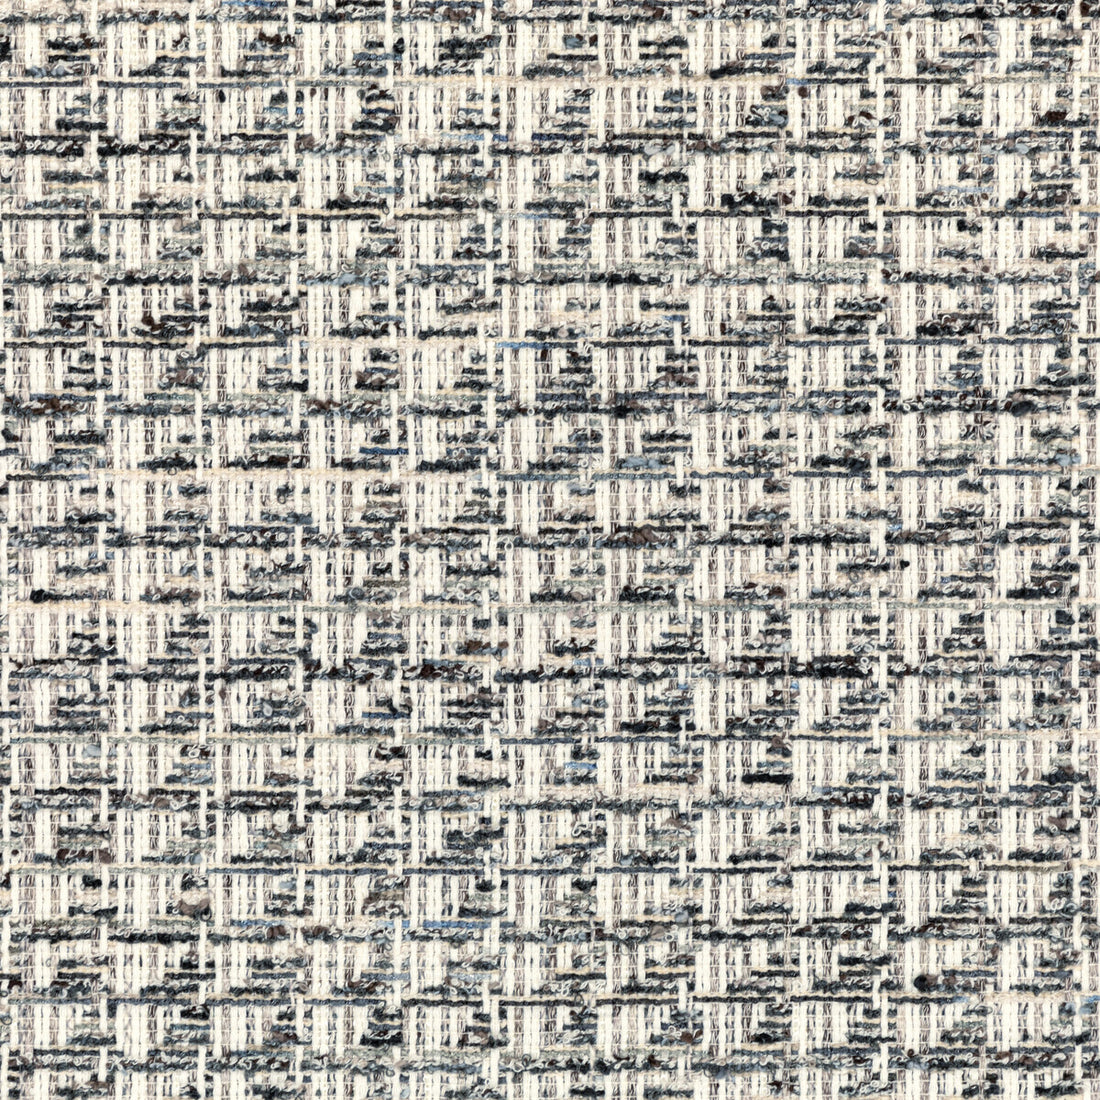 Tweed Jacket fabric in greystone color - pattern 34909.121.0 - by Kravet Couture in the Luxury Textures II collection